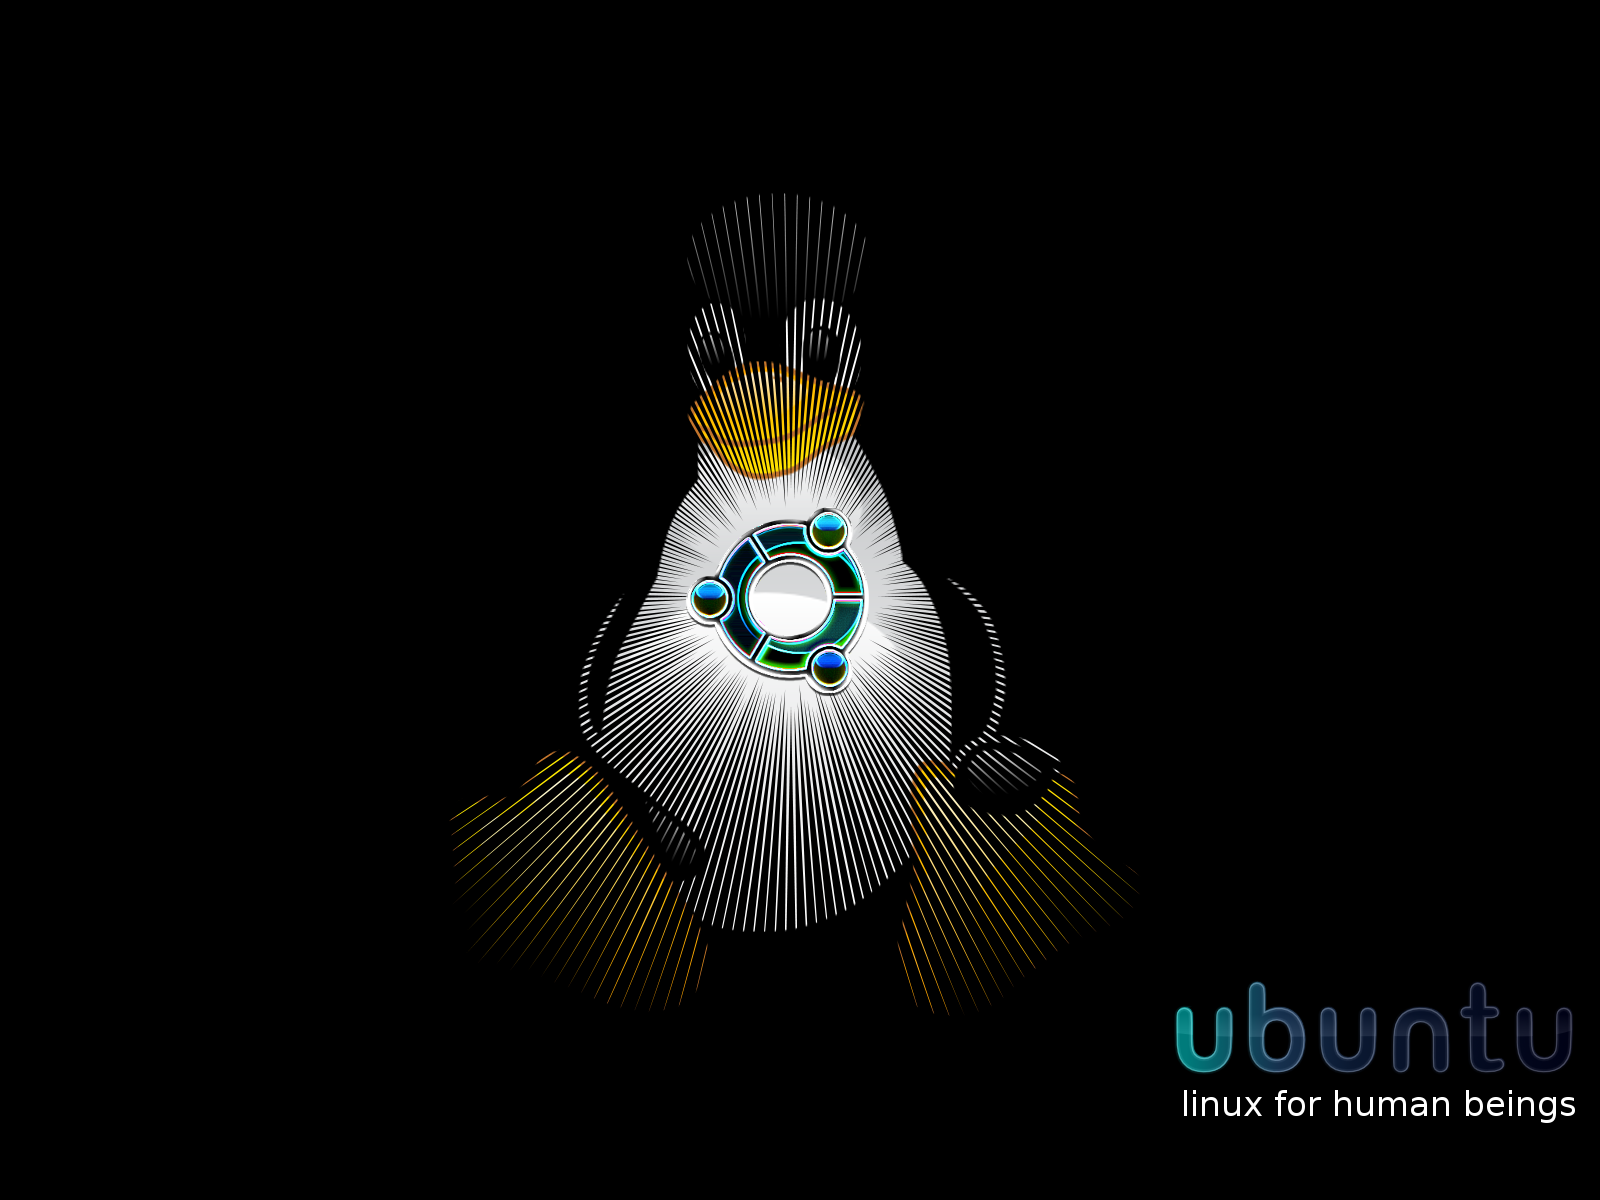 Download High quality Linux wallpaper / Computer / 1600x1200